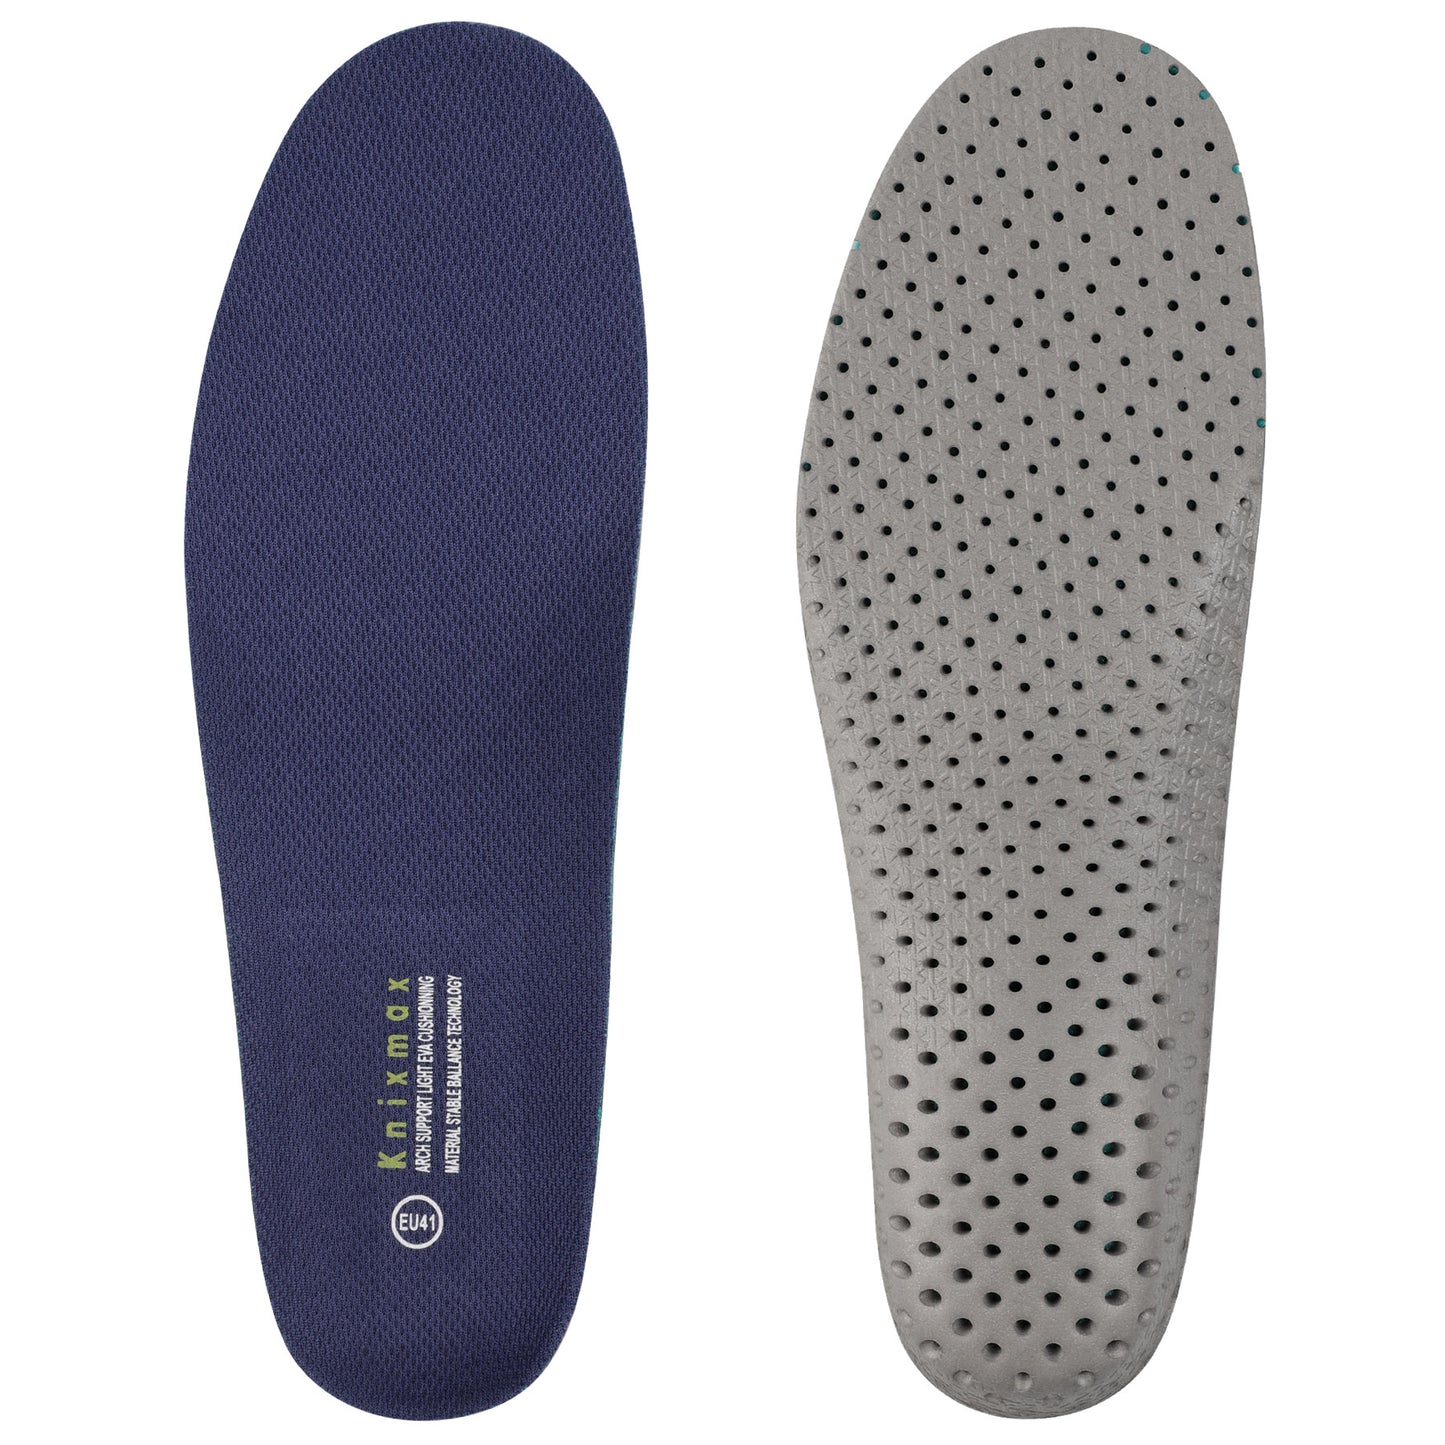 Knixmax Sports Insoles Navy Arch Support Full Length Orthotic Inserts for Men Women